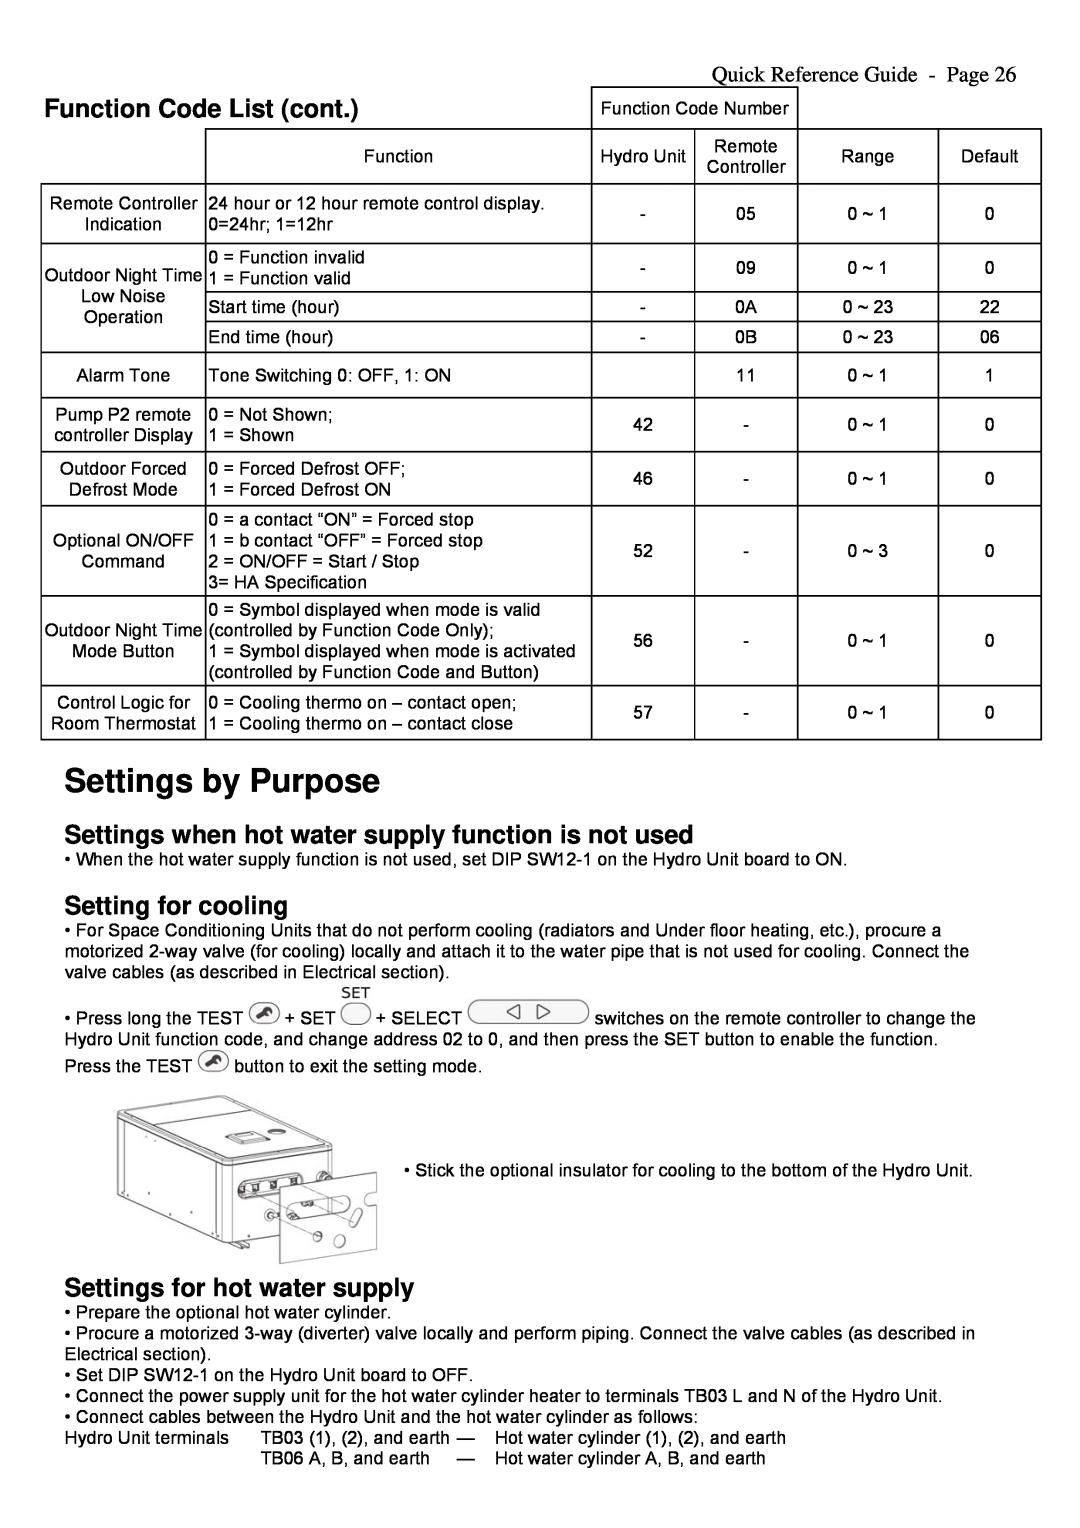 Toshiba A09-01P manual Settings by Purpose, Setting for cooling, Settings for hot water supply, Function Code List cont 